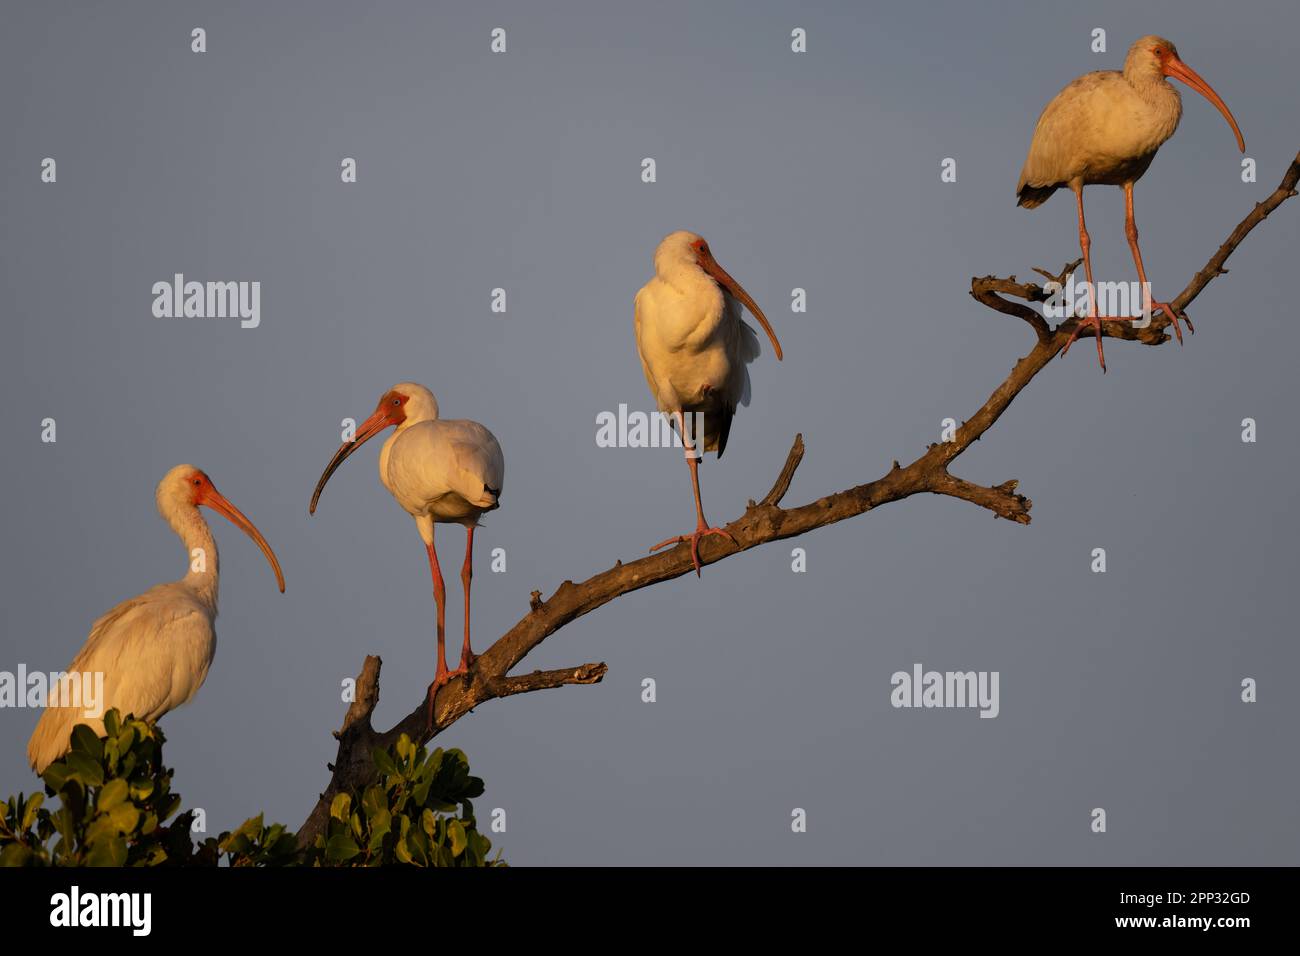 White ibis on a branch at sunset, Everglades Stock Photo